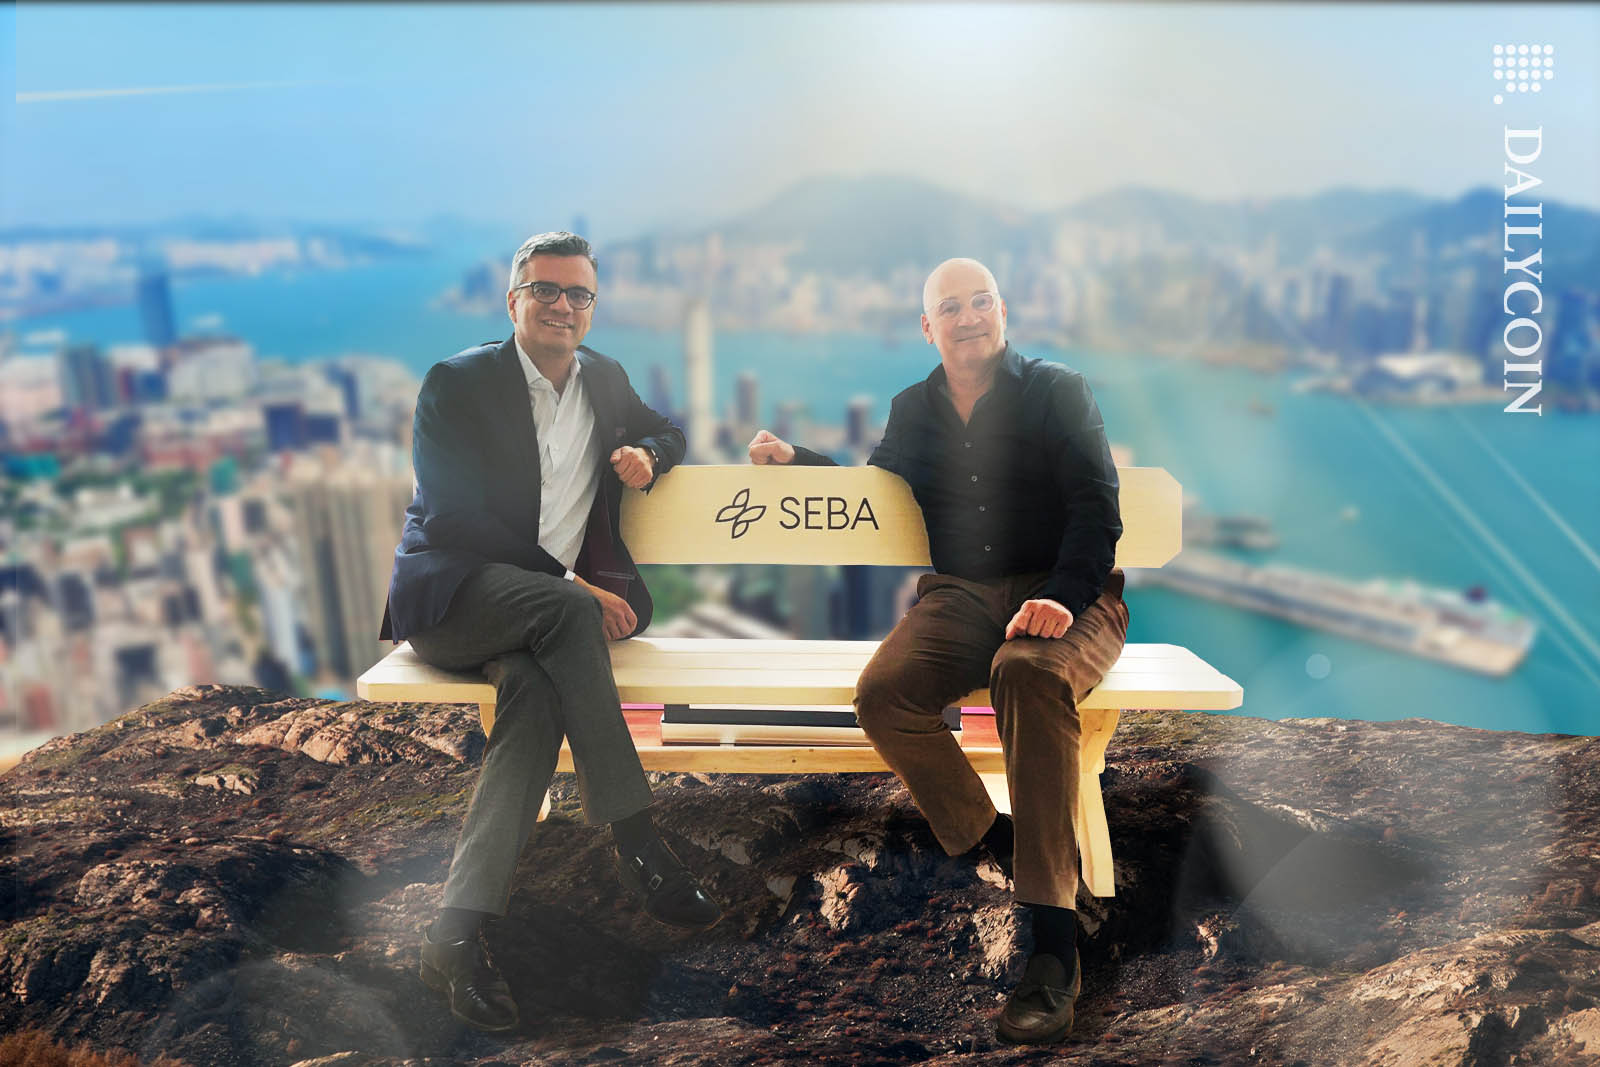 Seba CEO sitting on a bench with a man overlooking Hong Kong.